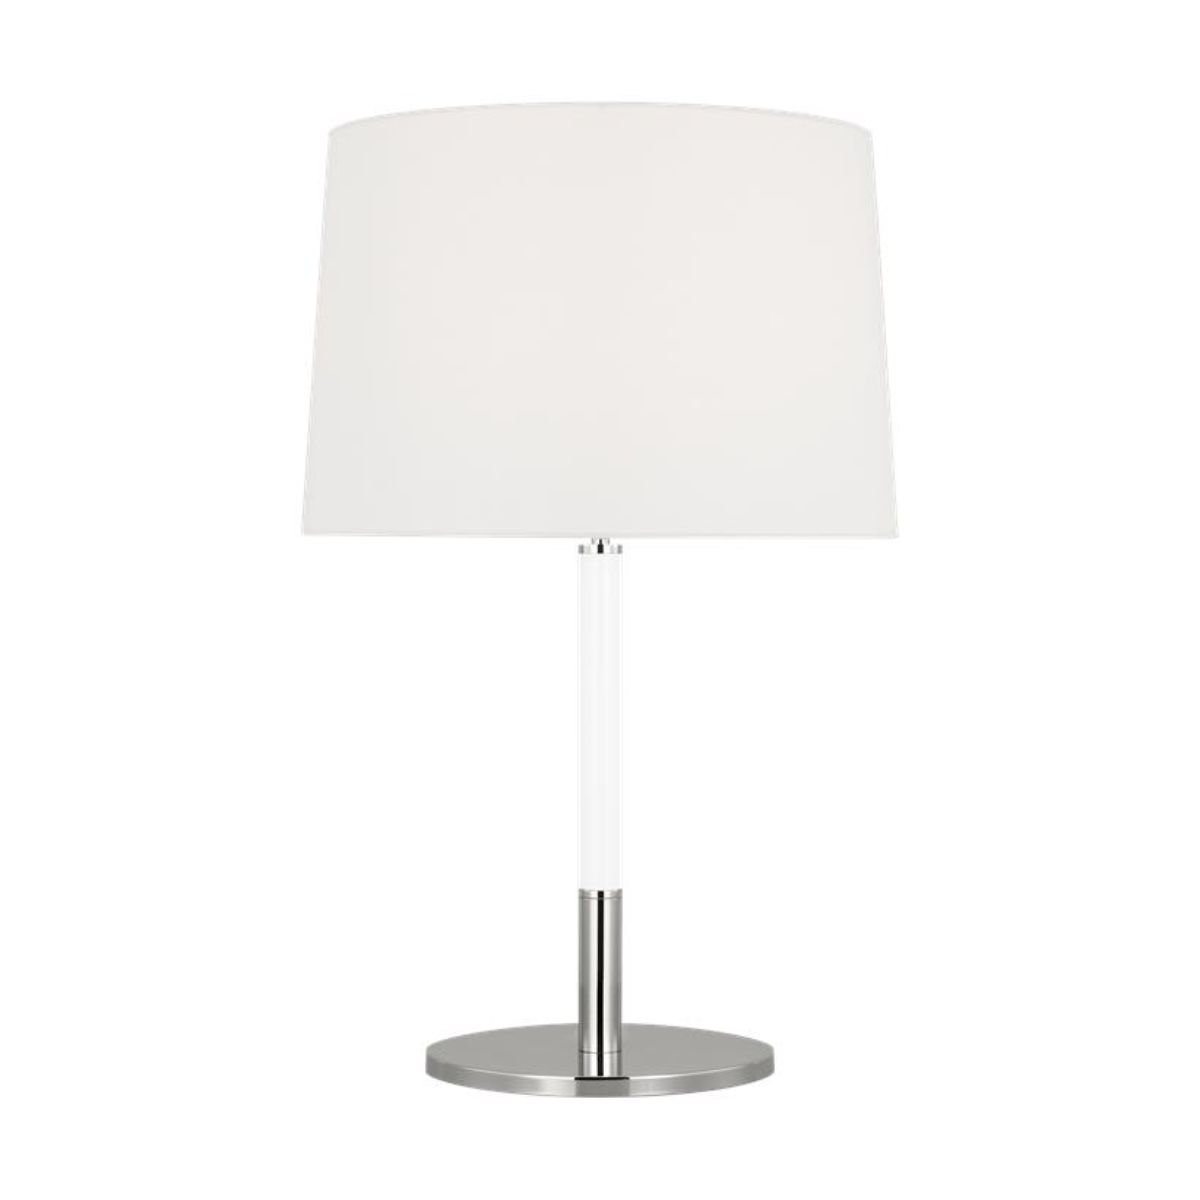 Monroe Medium Table Lamp Polished Nickel with White Accents - Bees Lighting